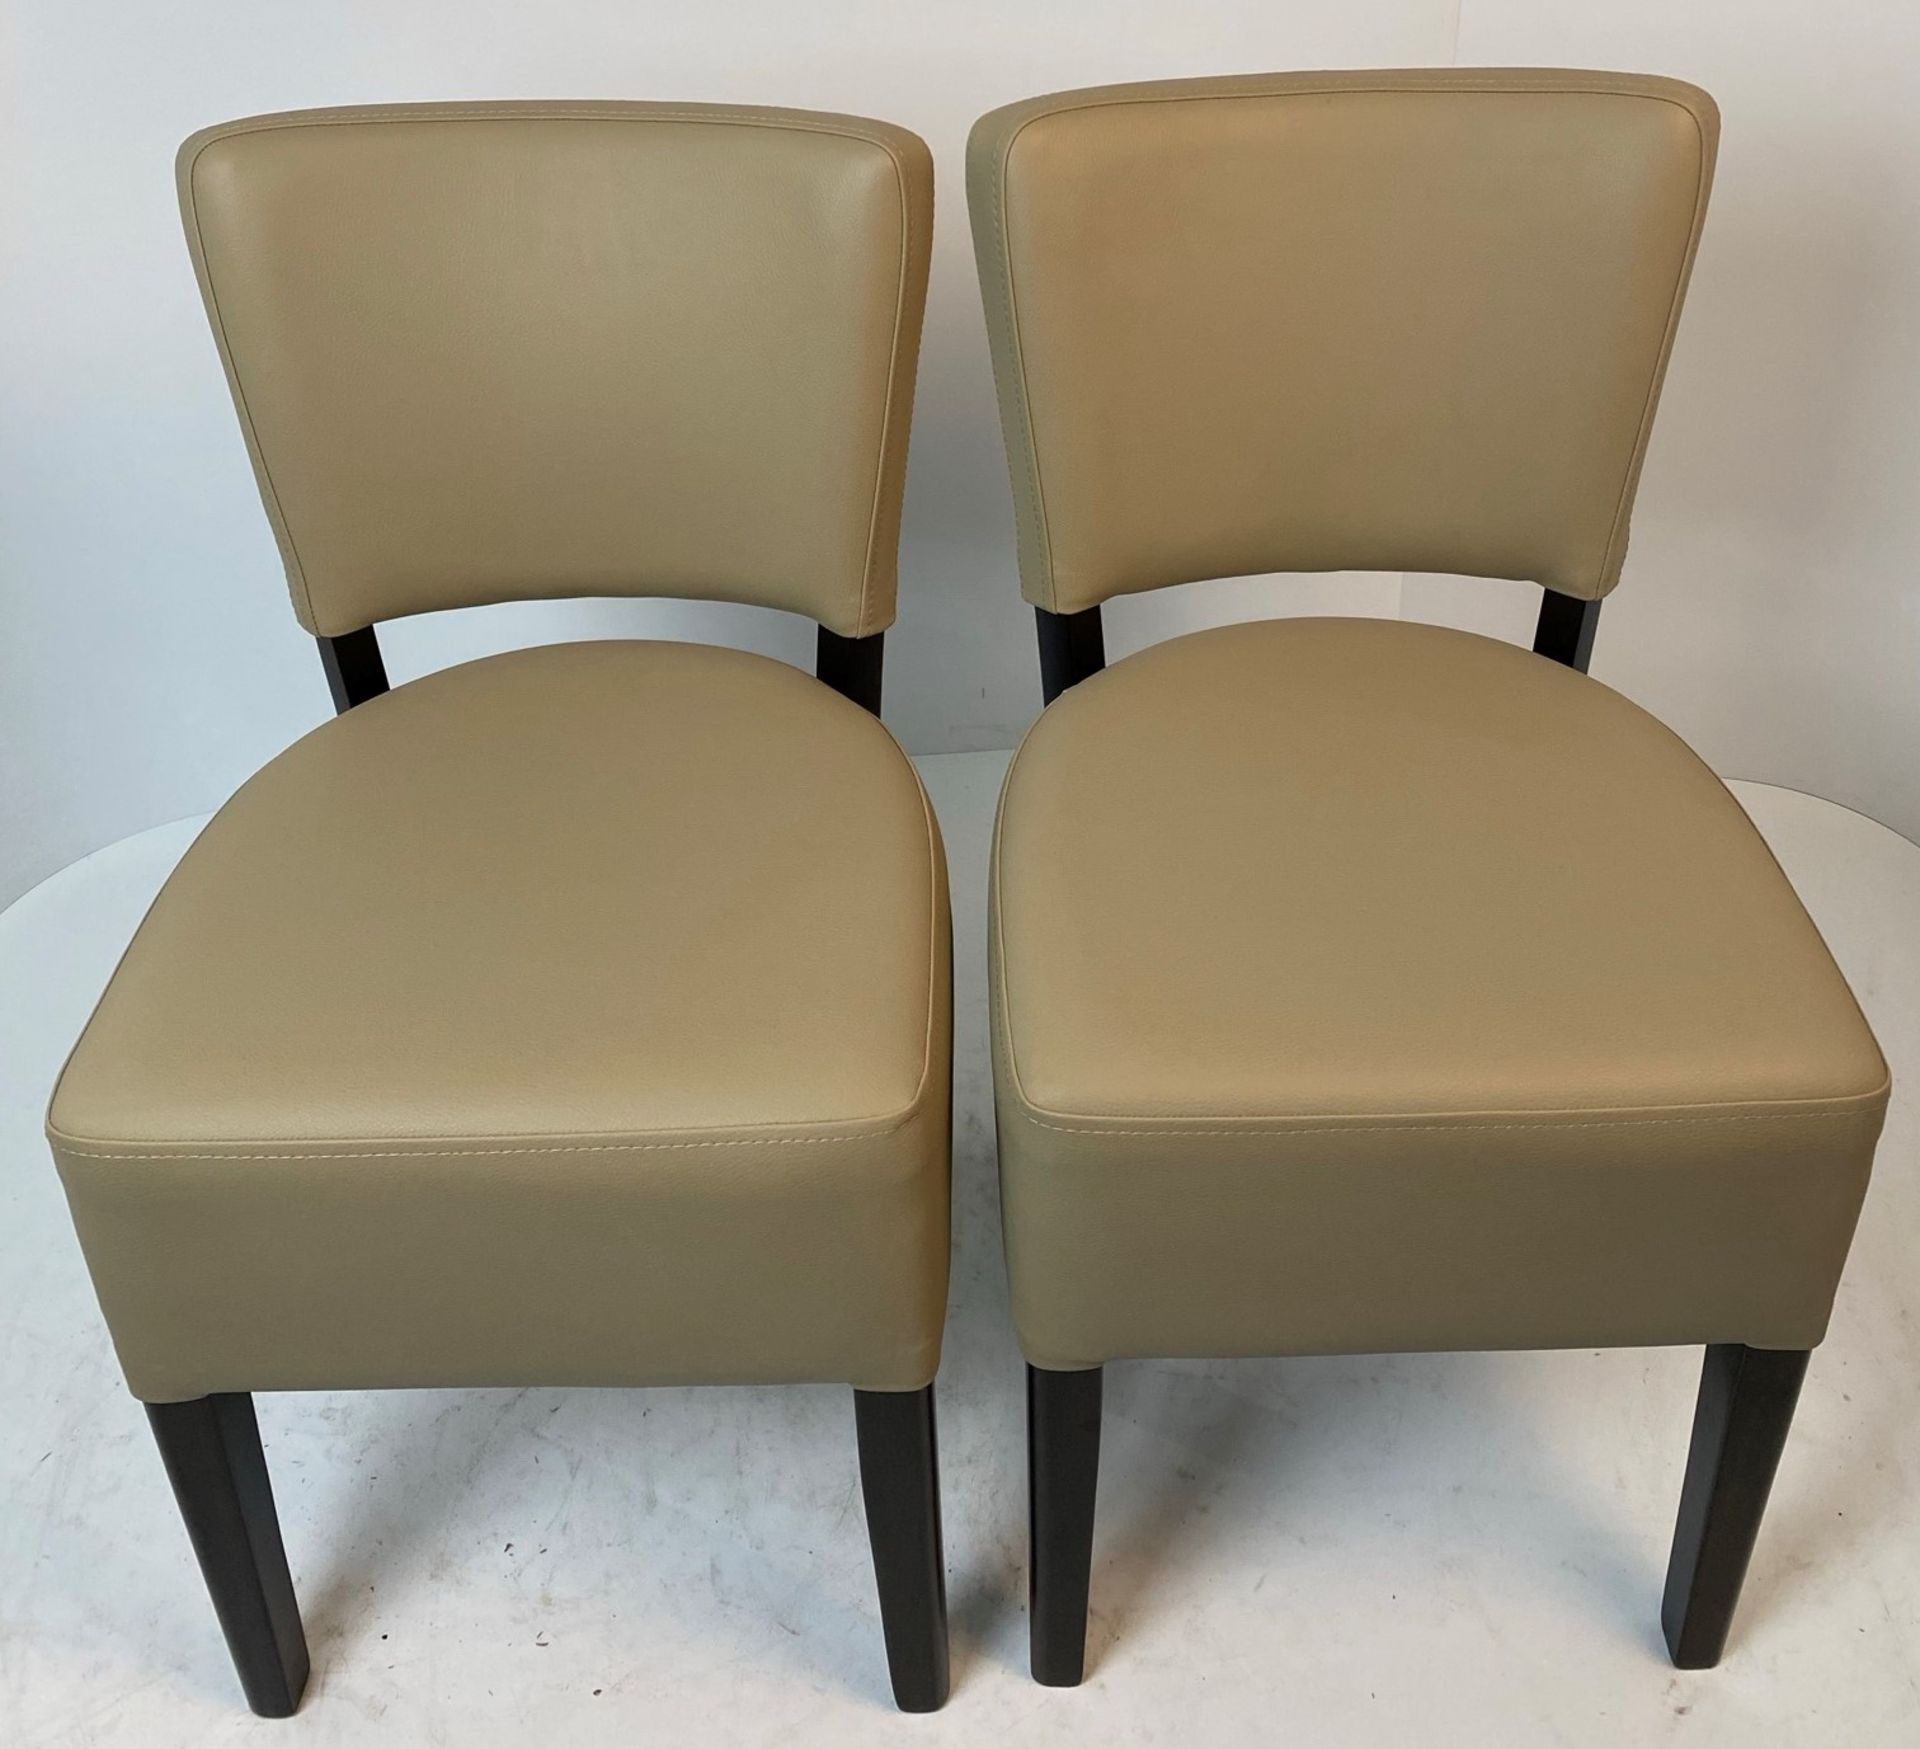 2 x Memphis Vena BE-9 side/dining chairs with Wenge coloured frames